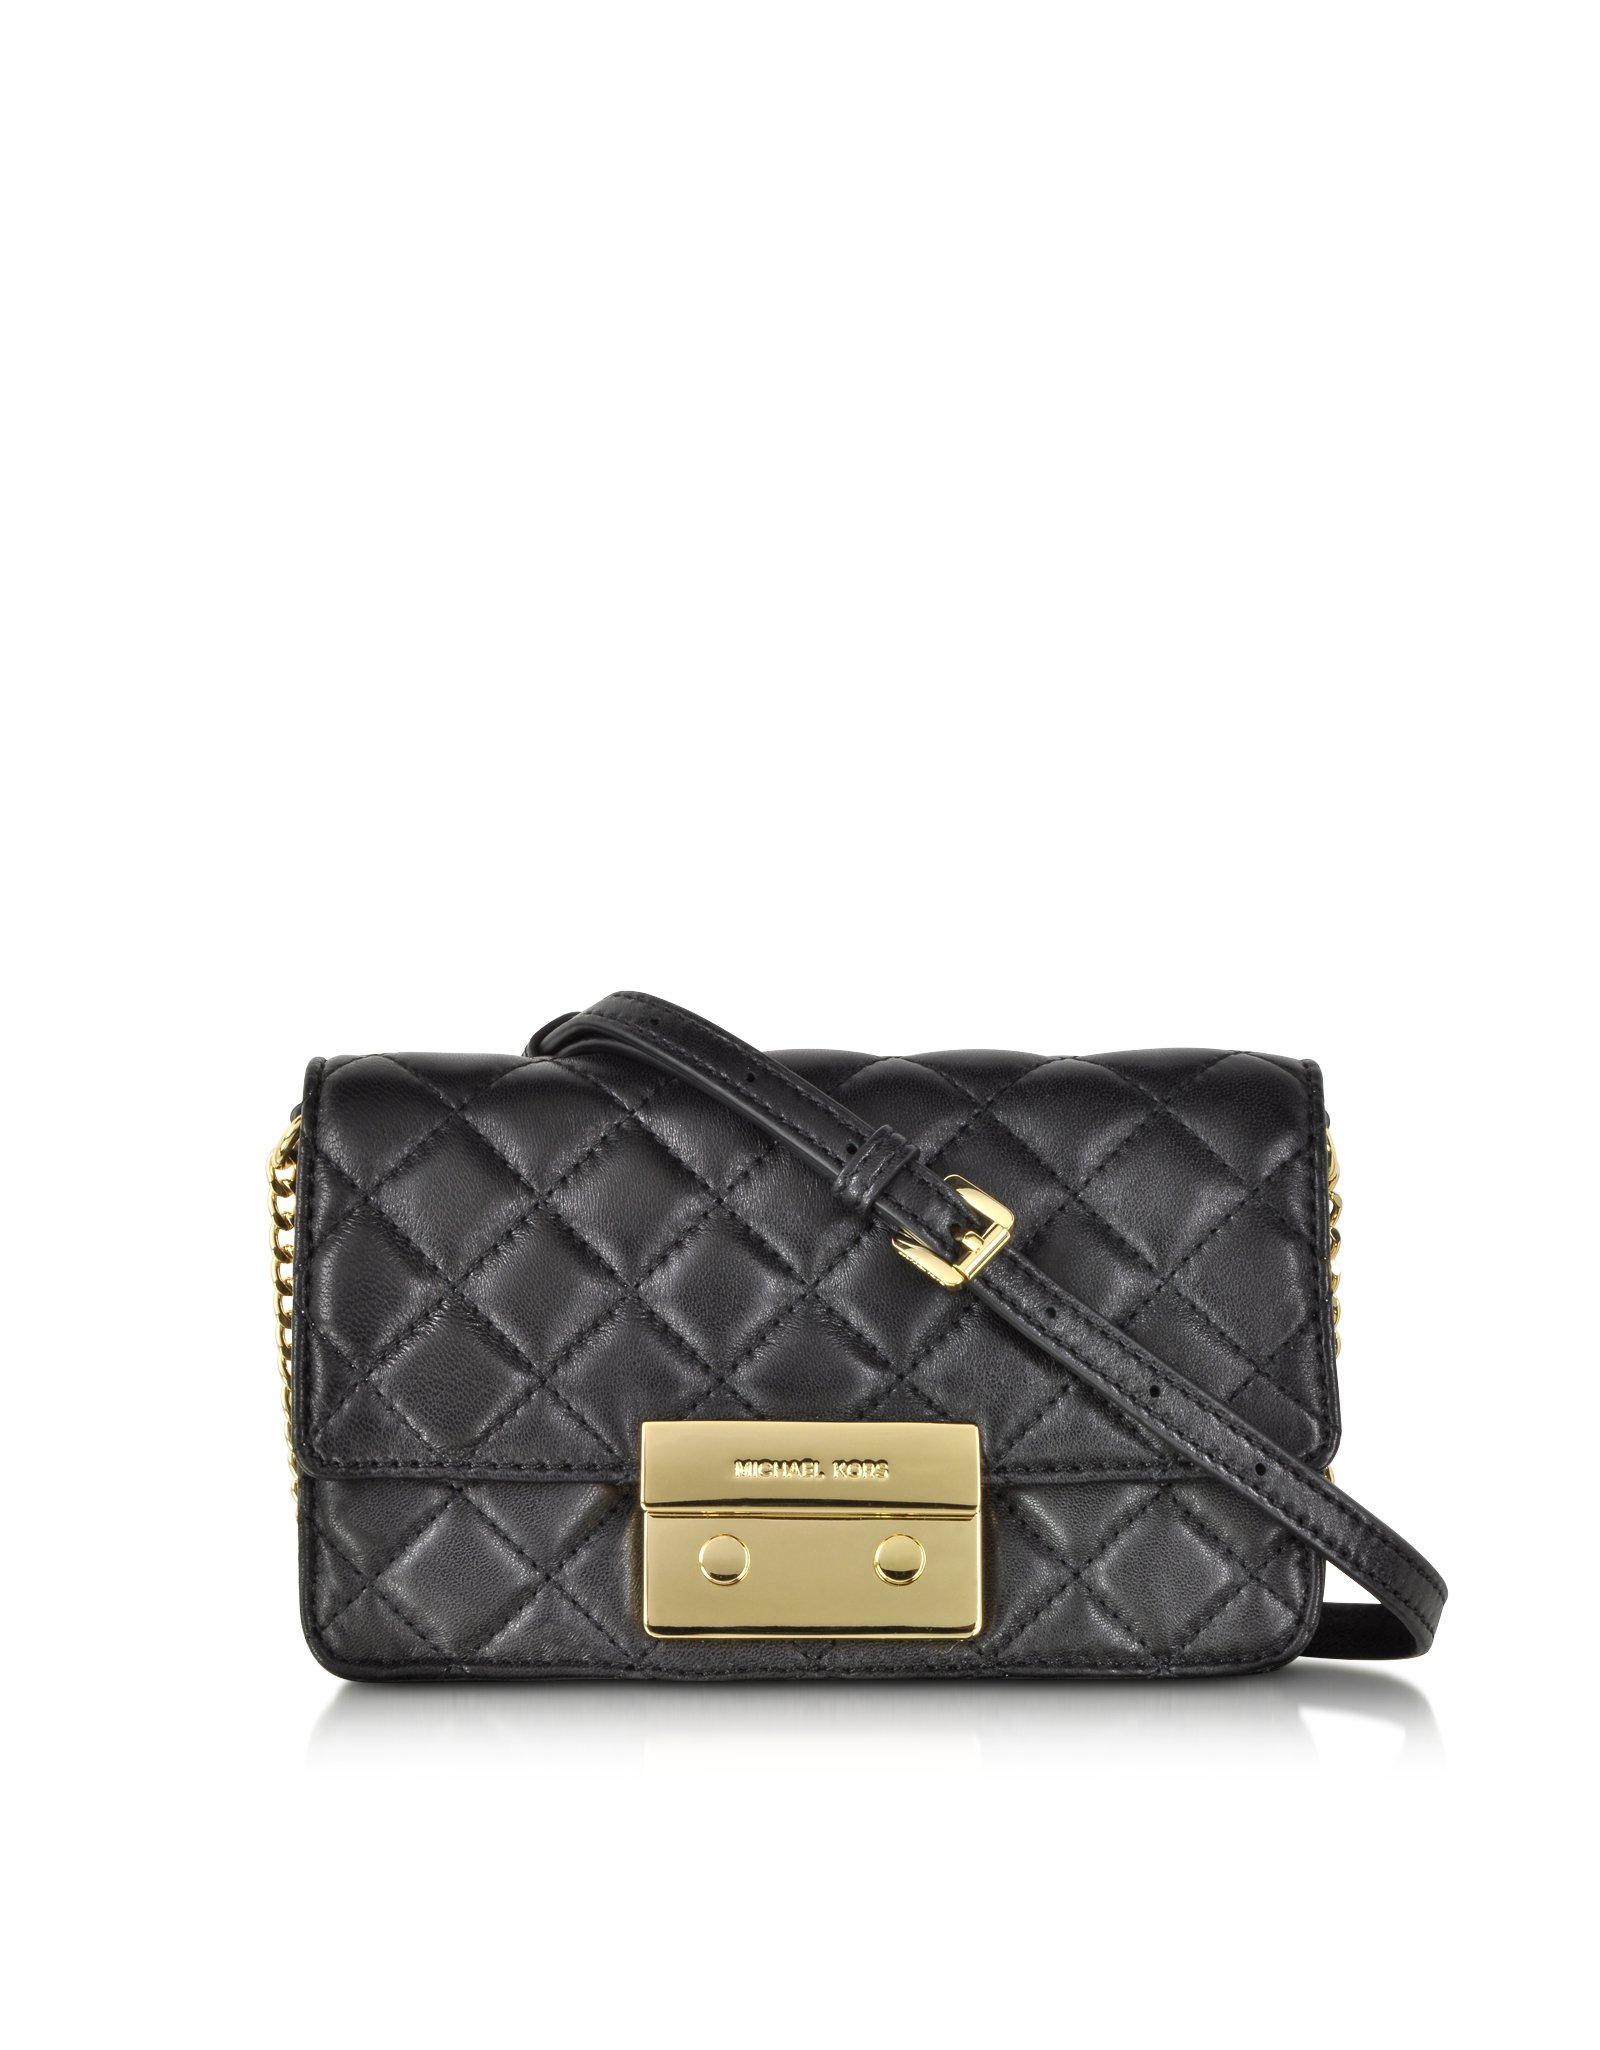 Lyst - Michael Kors Sloan Black Quilted Leather Chain Crossbody Bag in Black